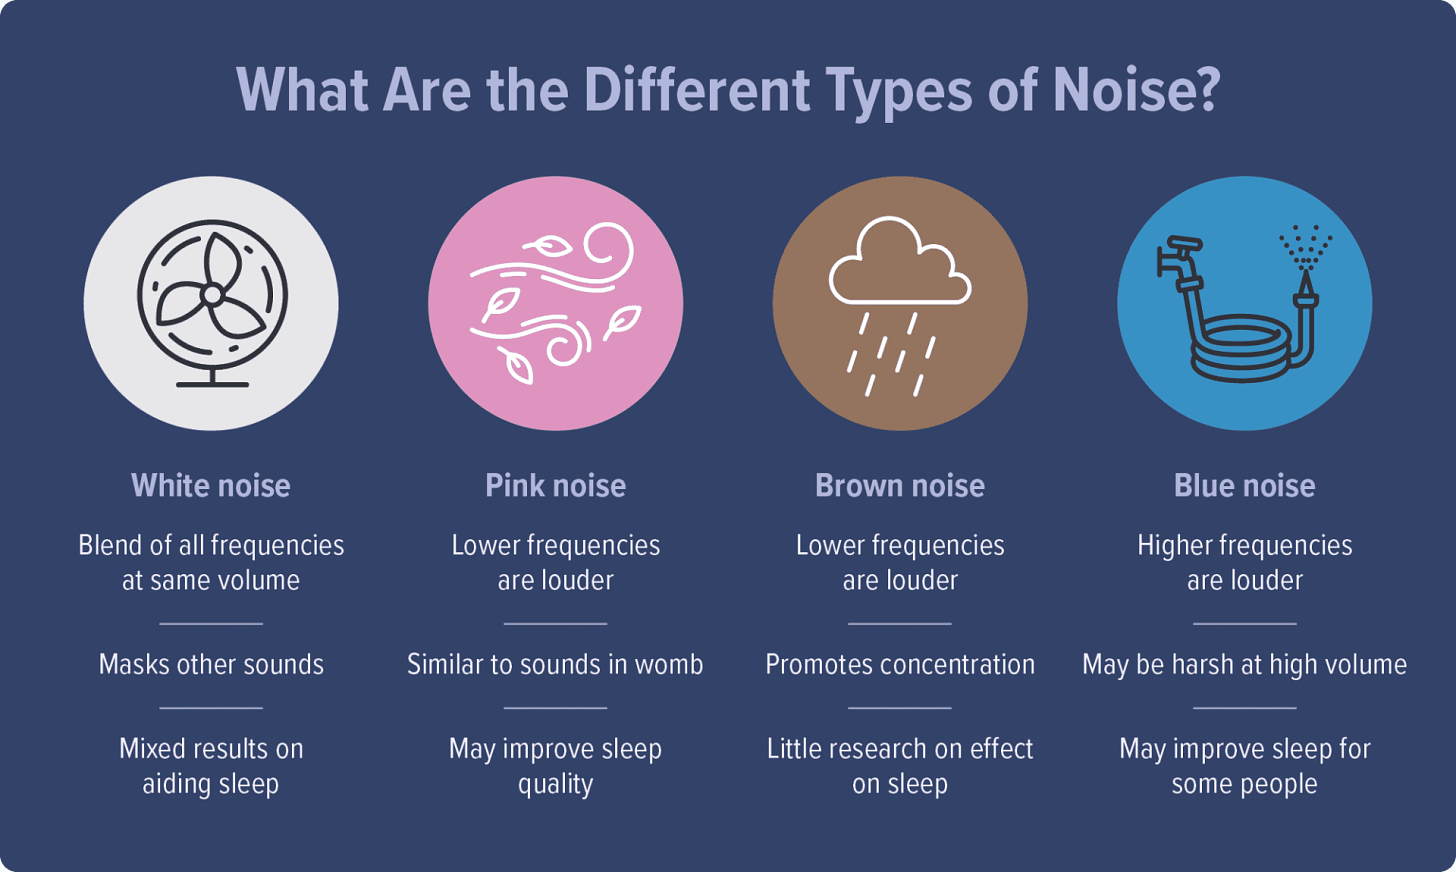 What Are the Different Types of Noise?